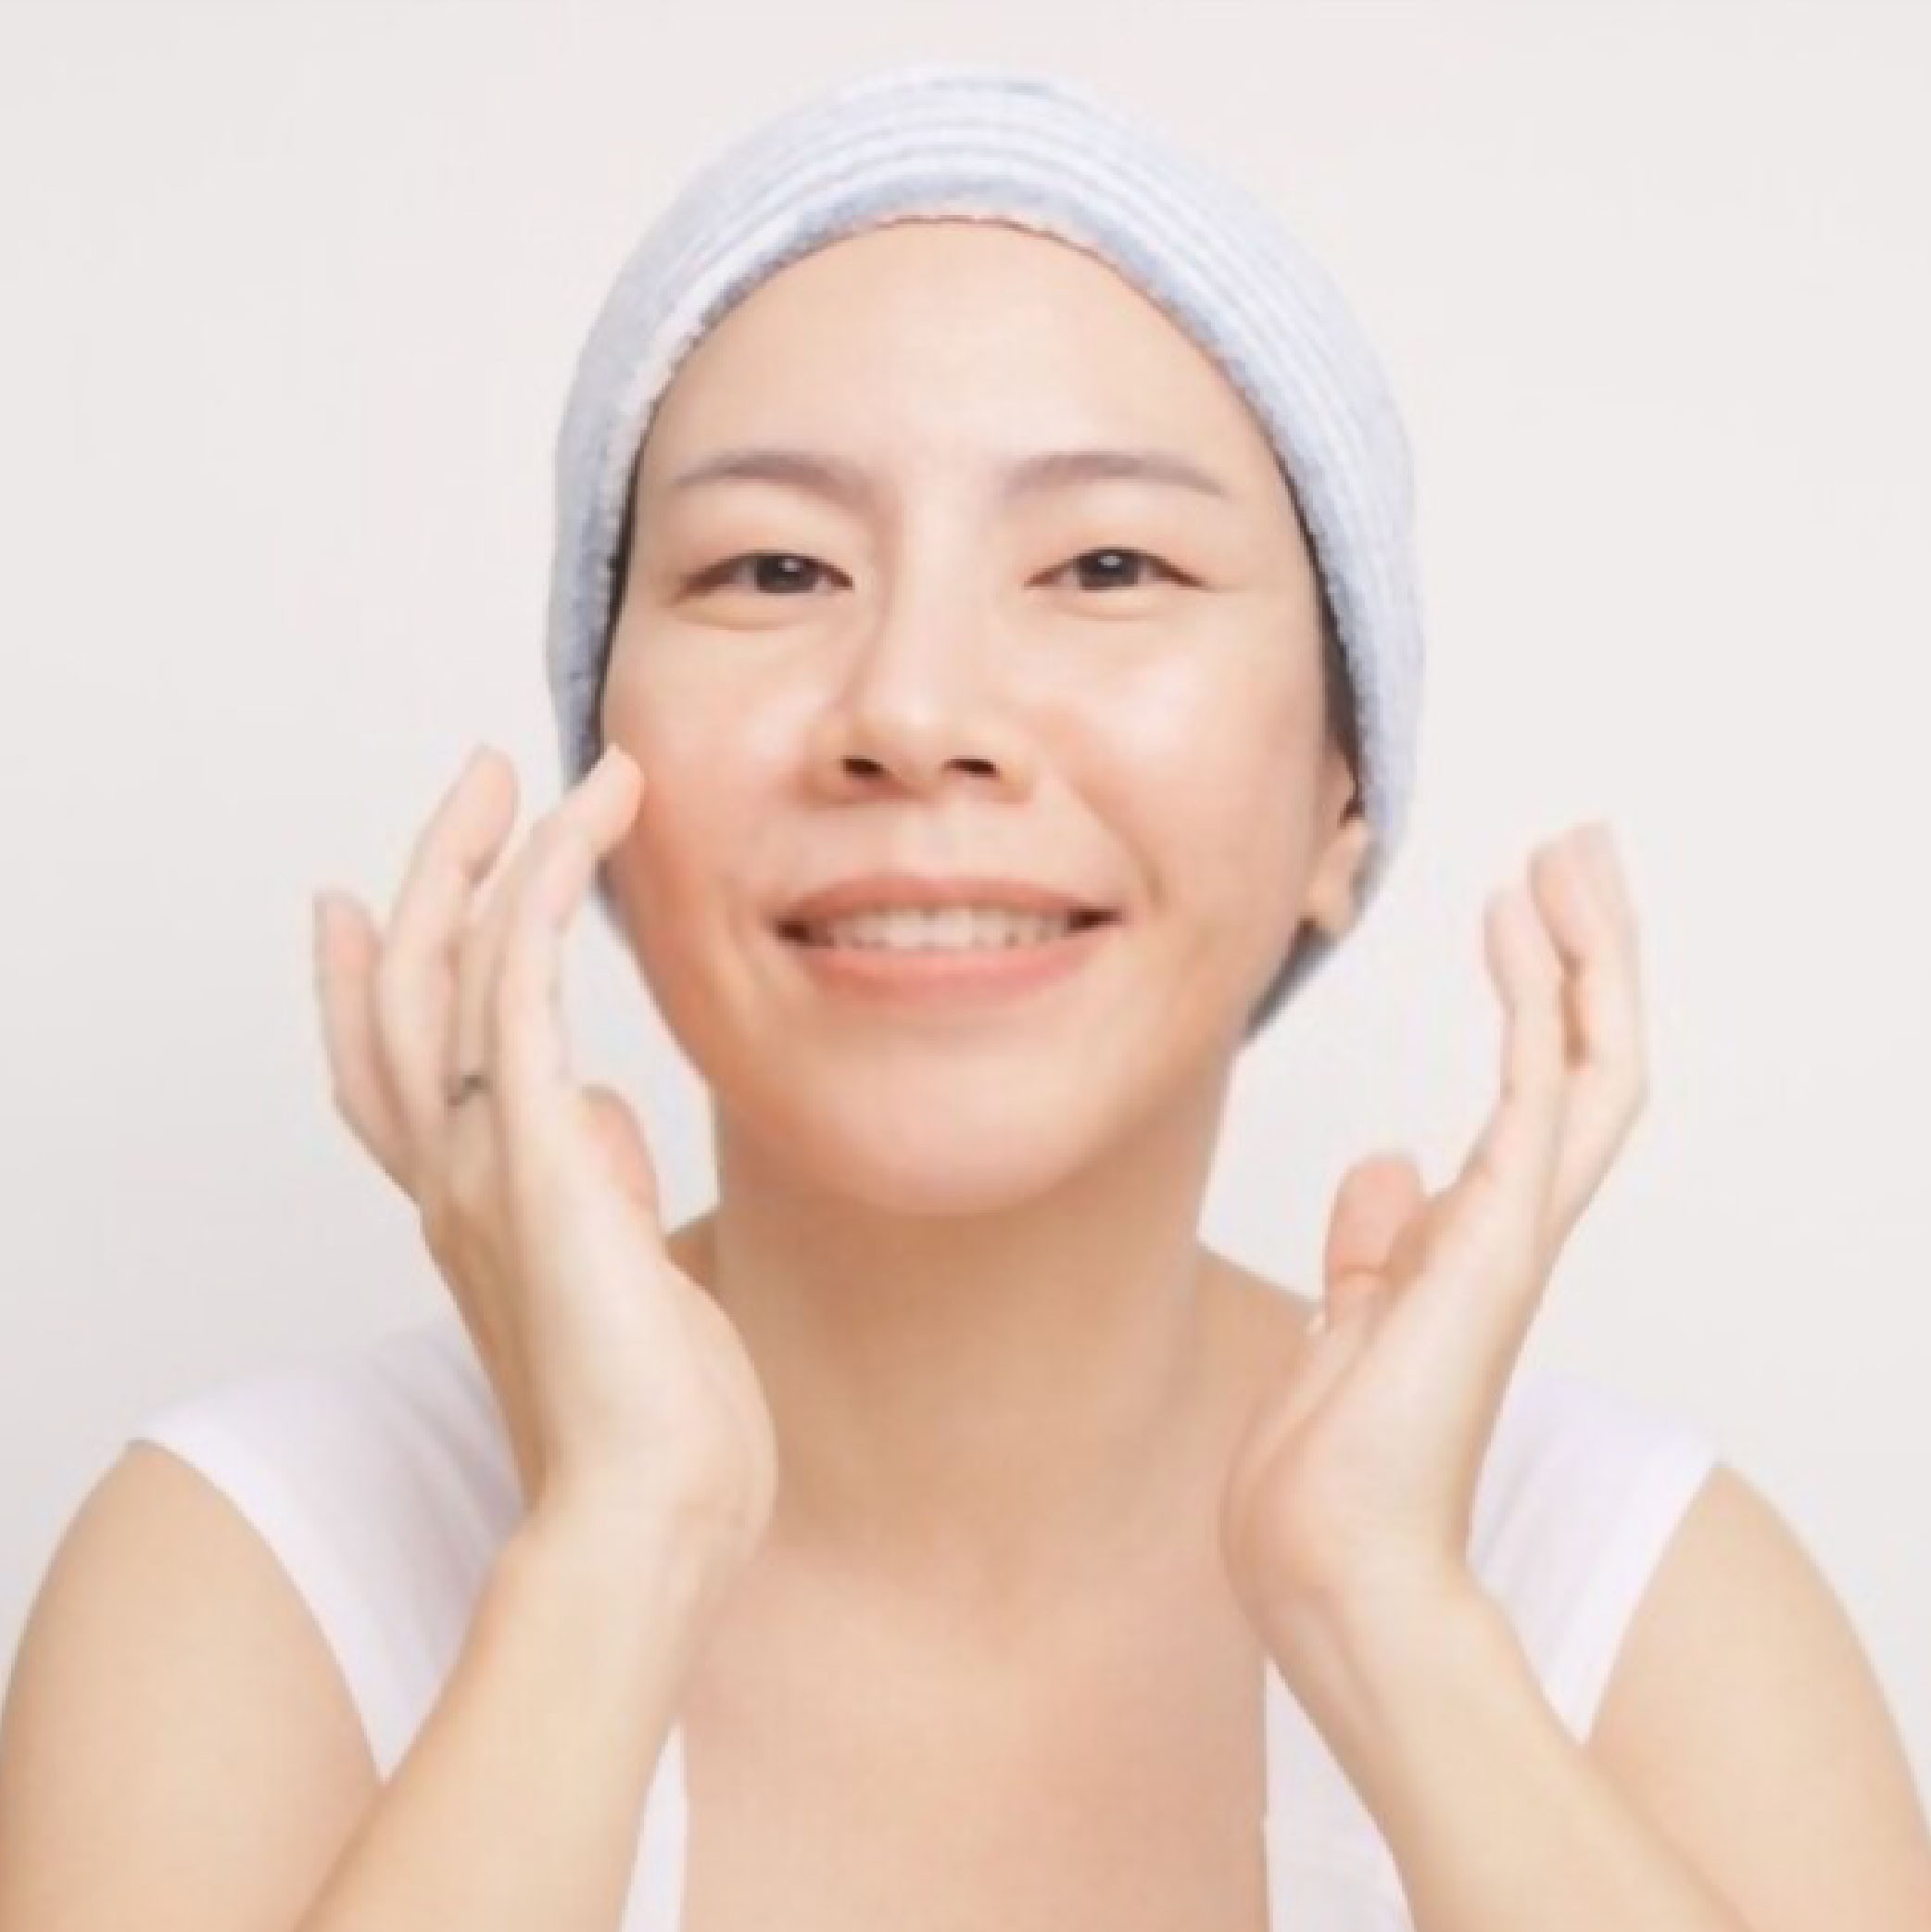 boosting collagen production in your skin